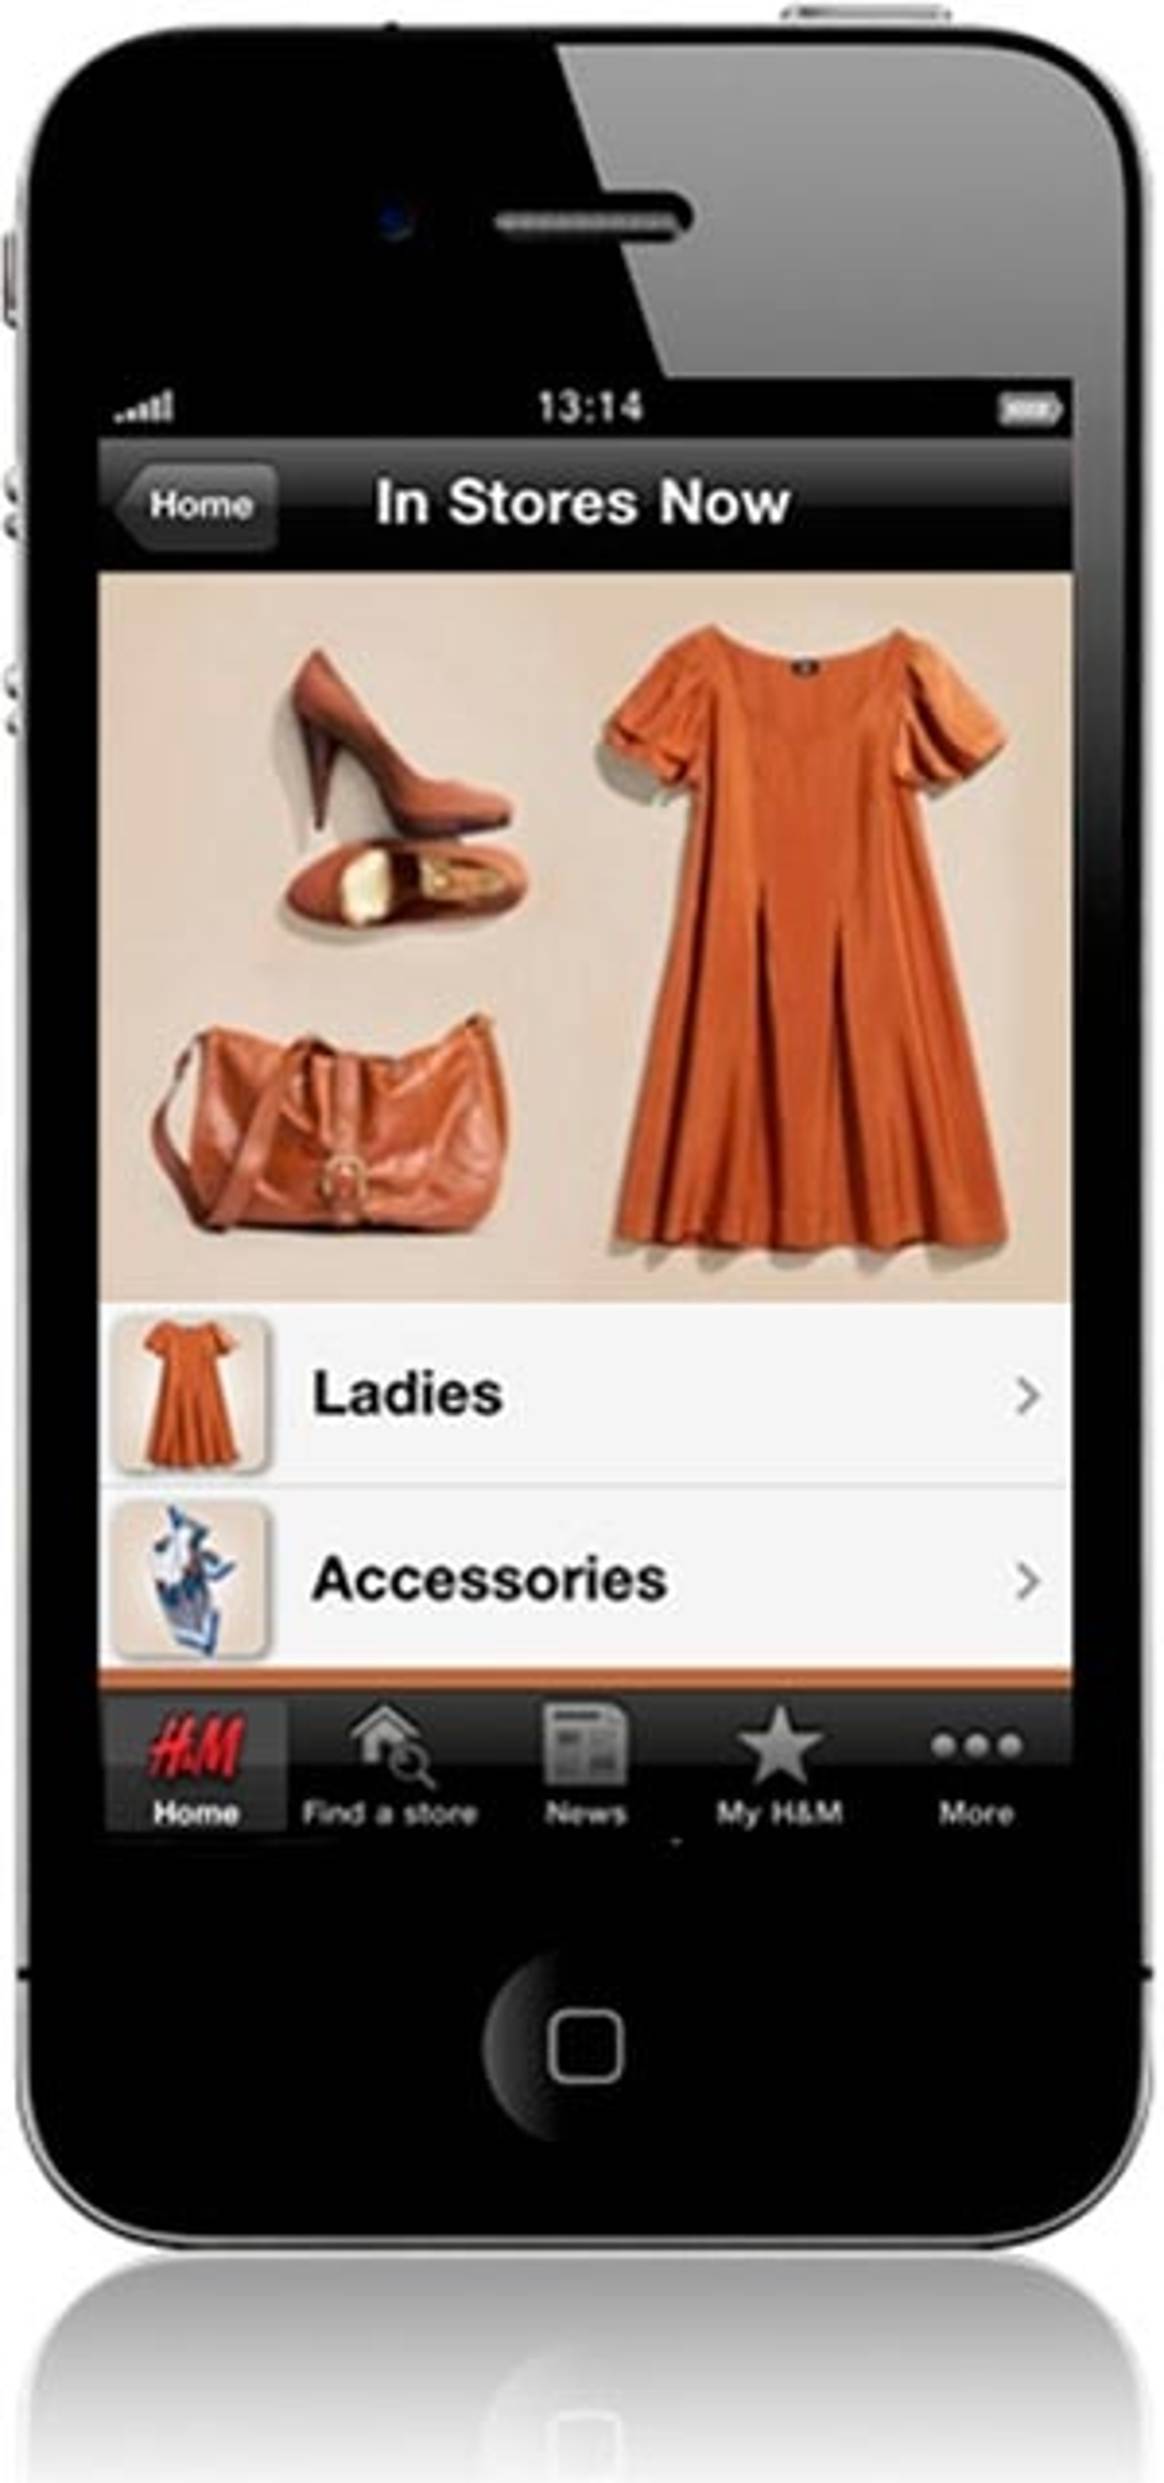 Traditional Webs satisfy shoppers, mobile apps don't